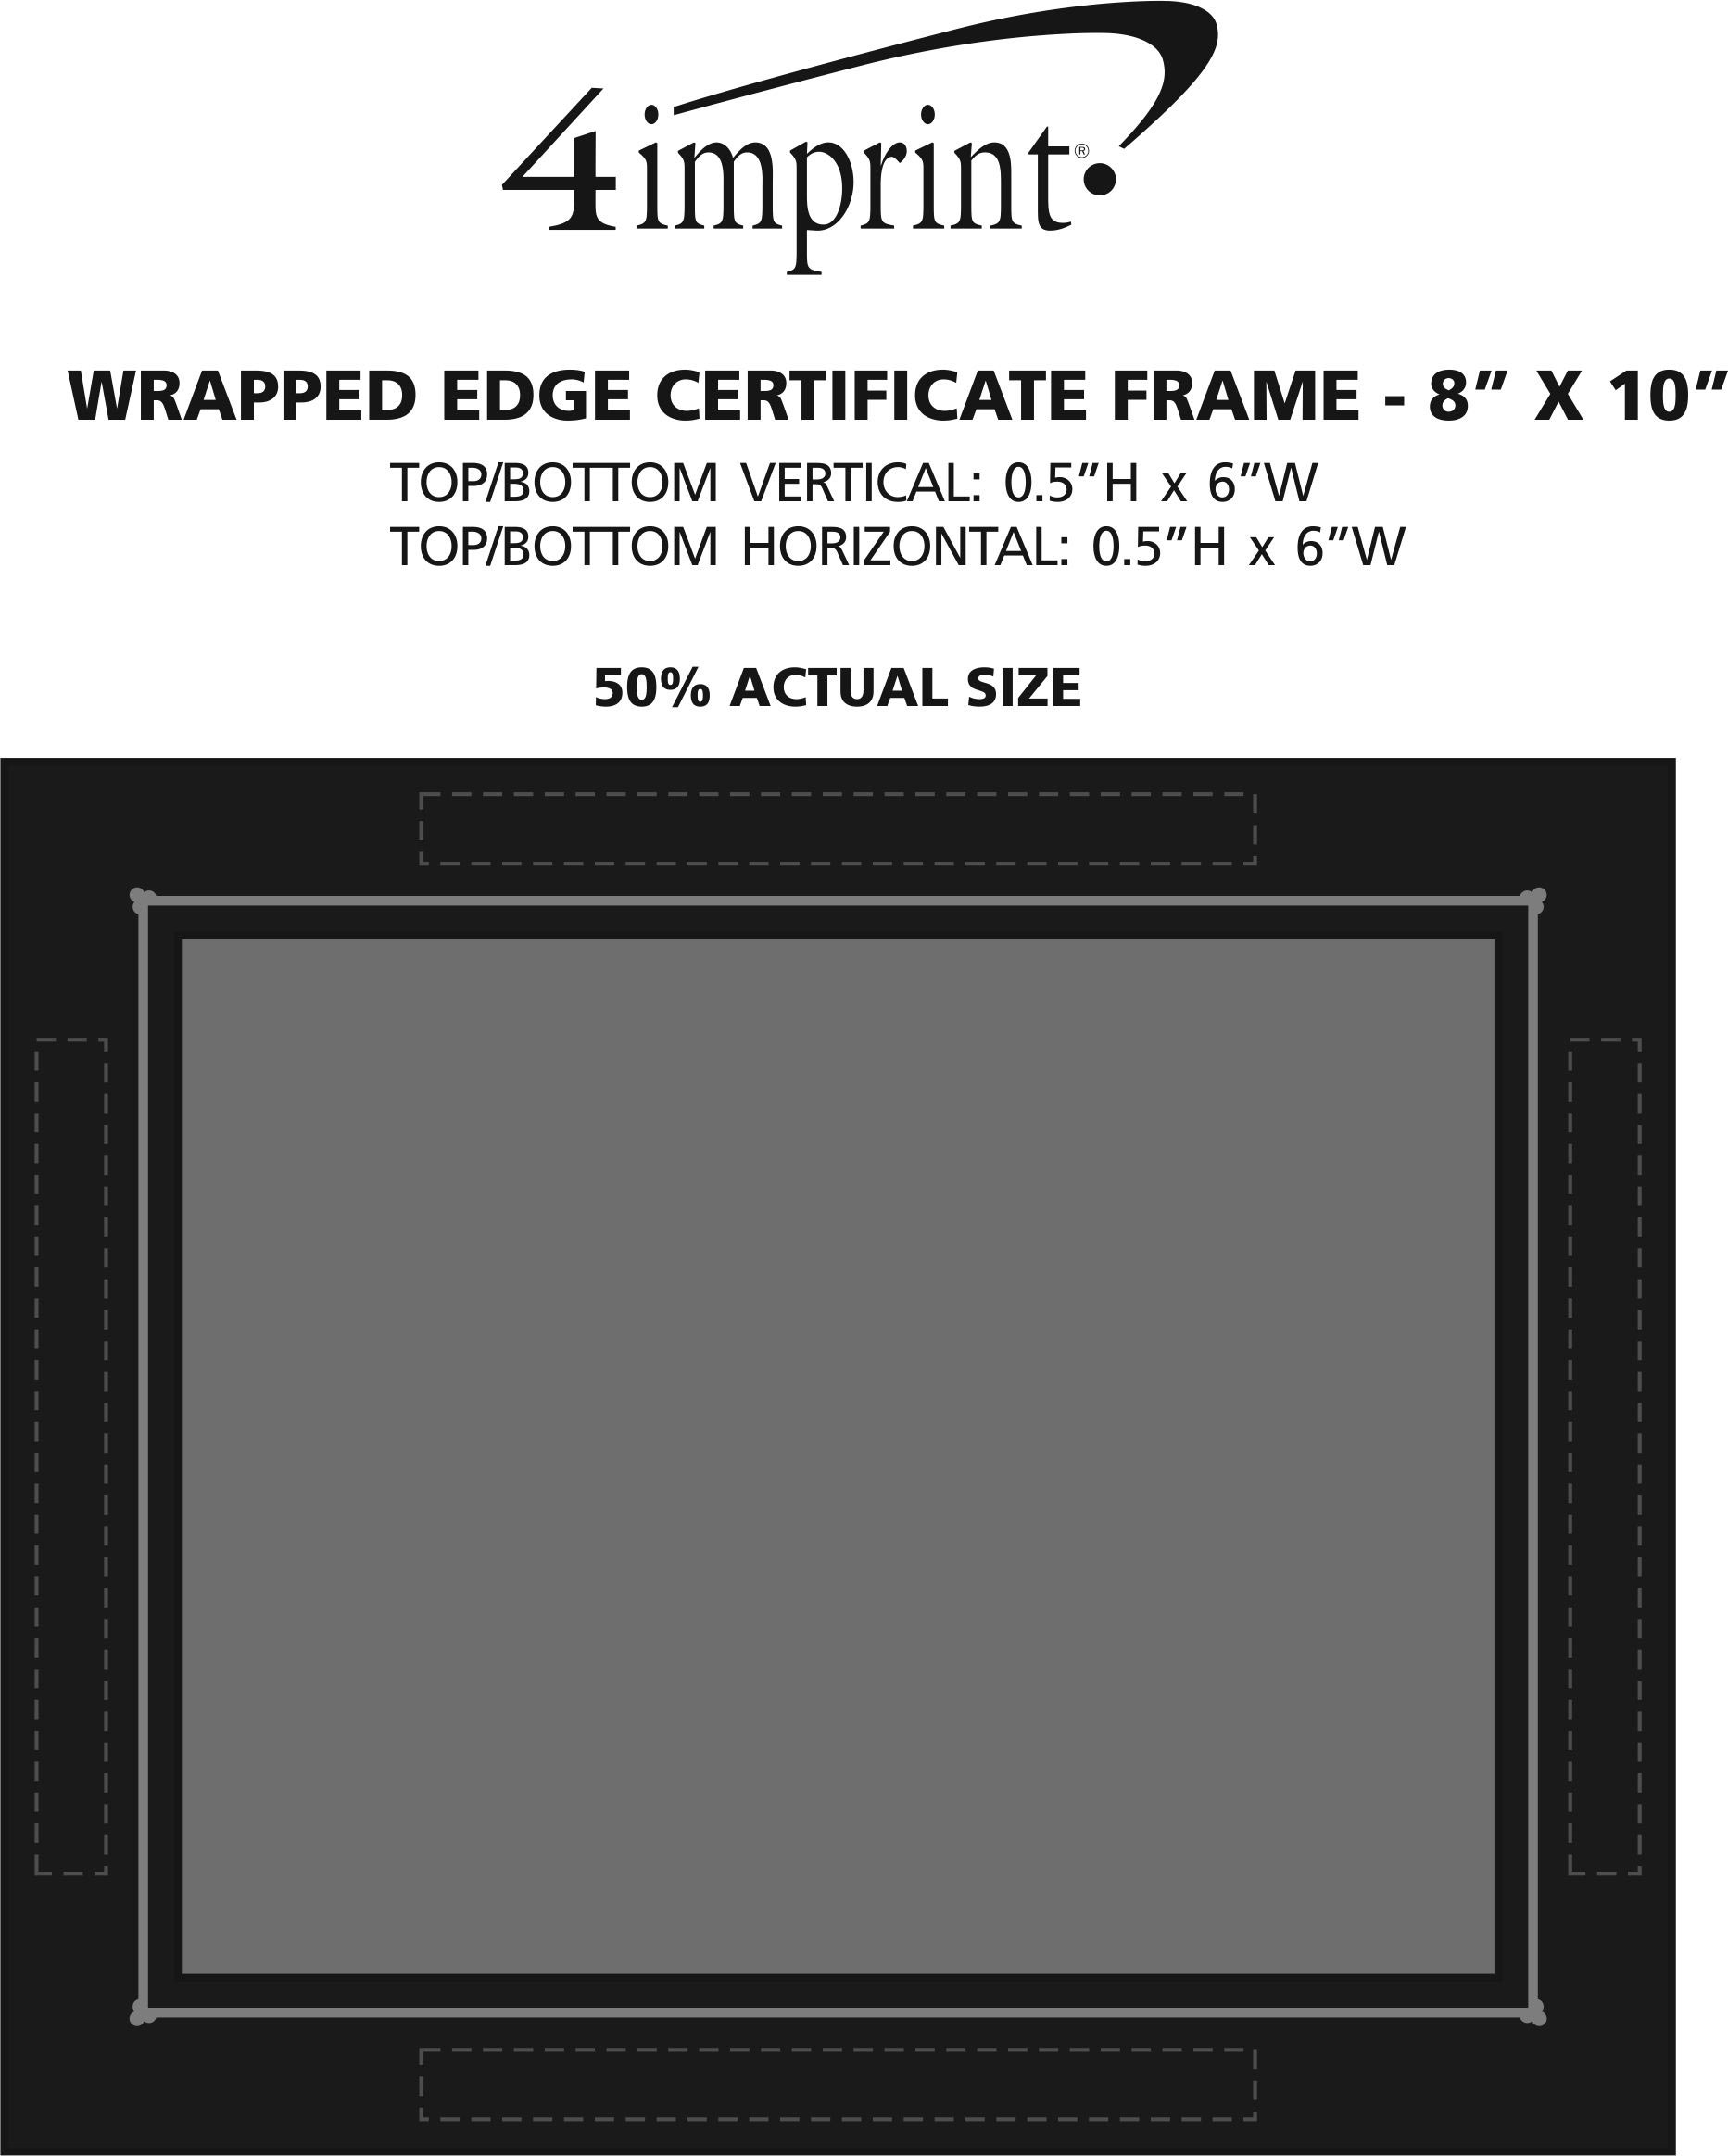 4imprint-wrapped-edge-certificate-frame-8-x-10-119362-810